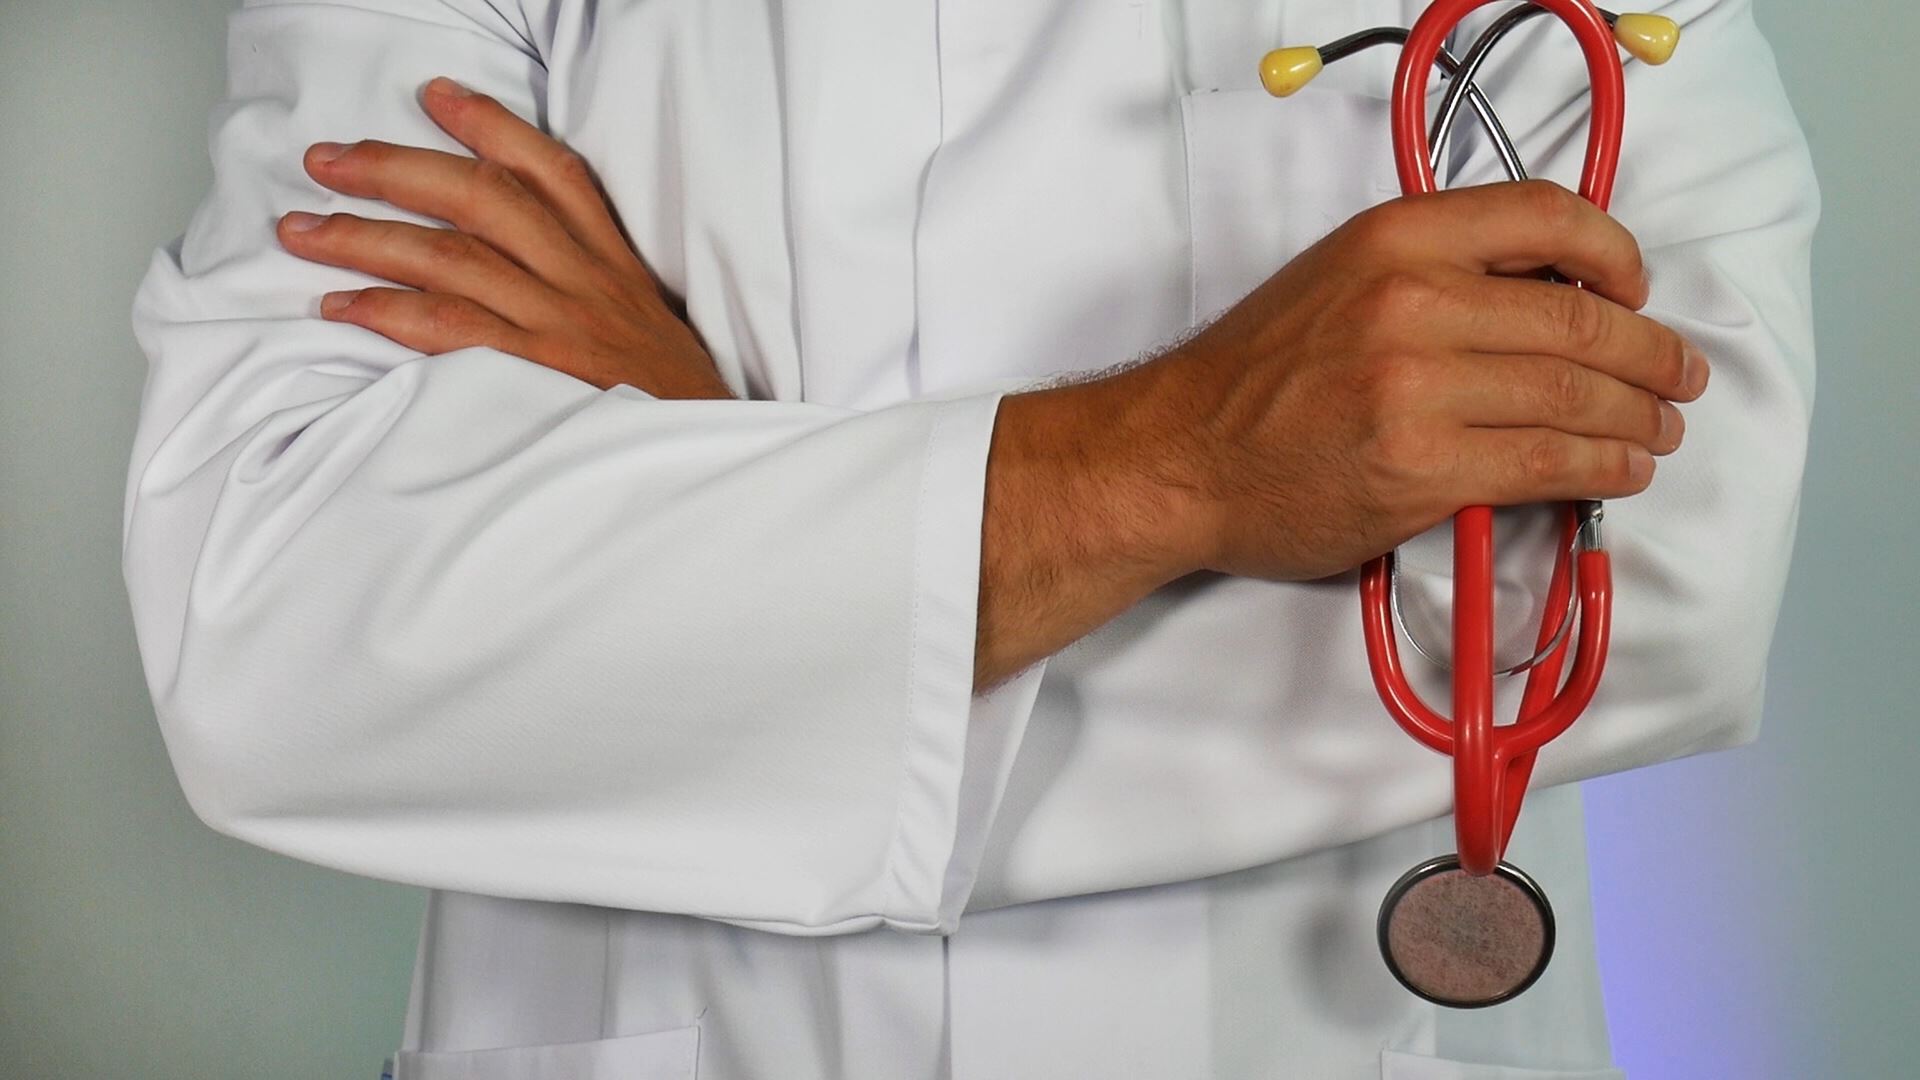 A person in a white coat holding a red stethoscope